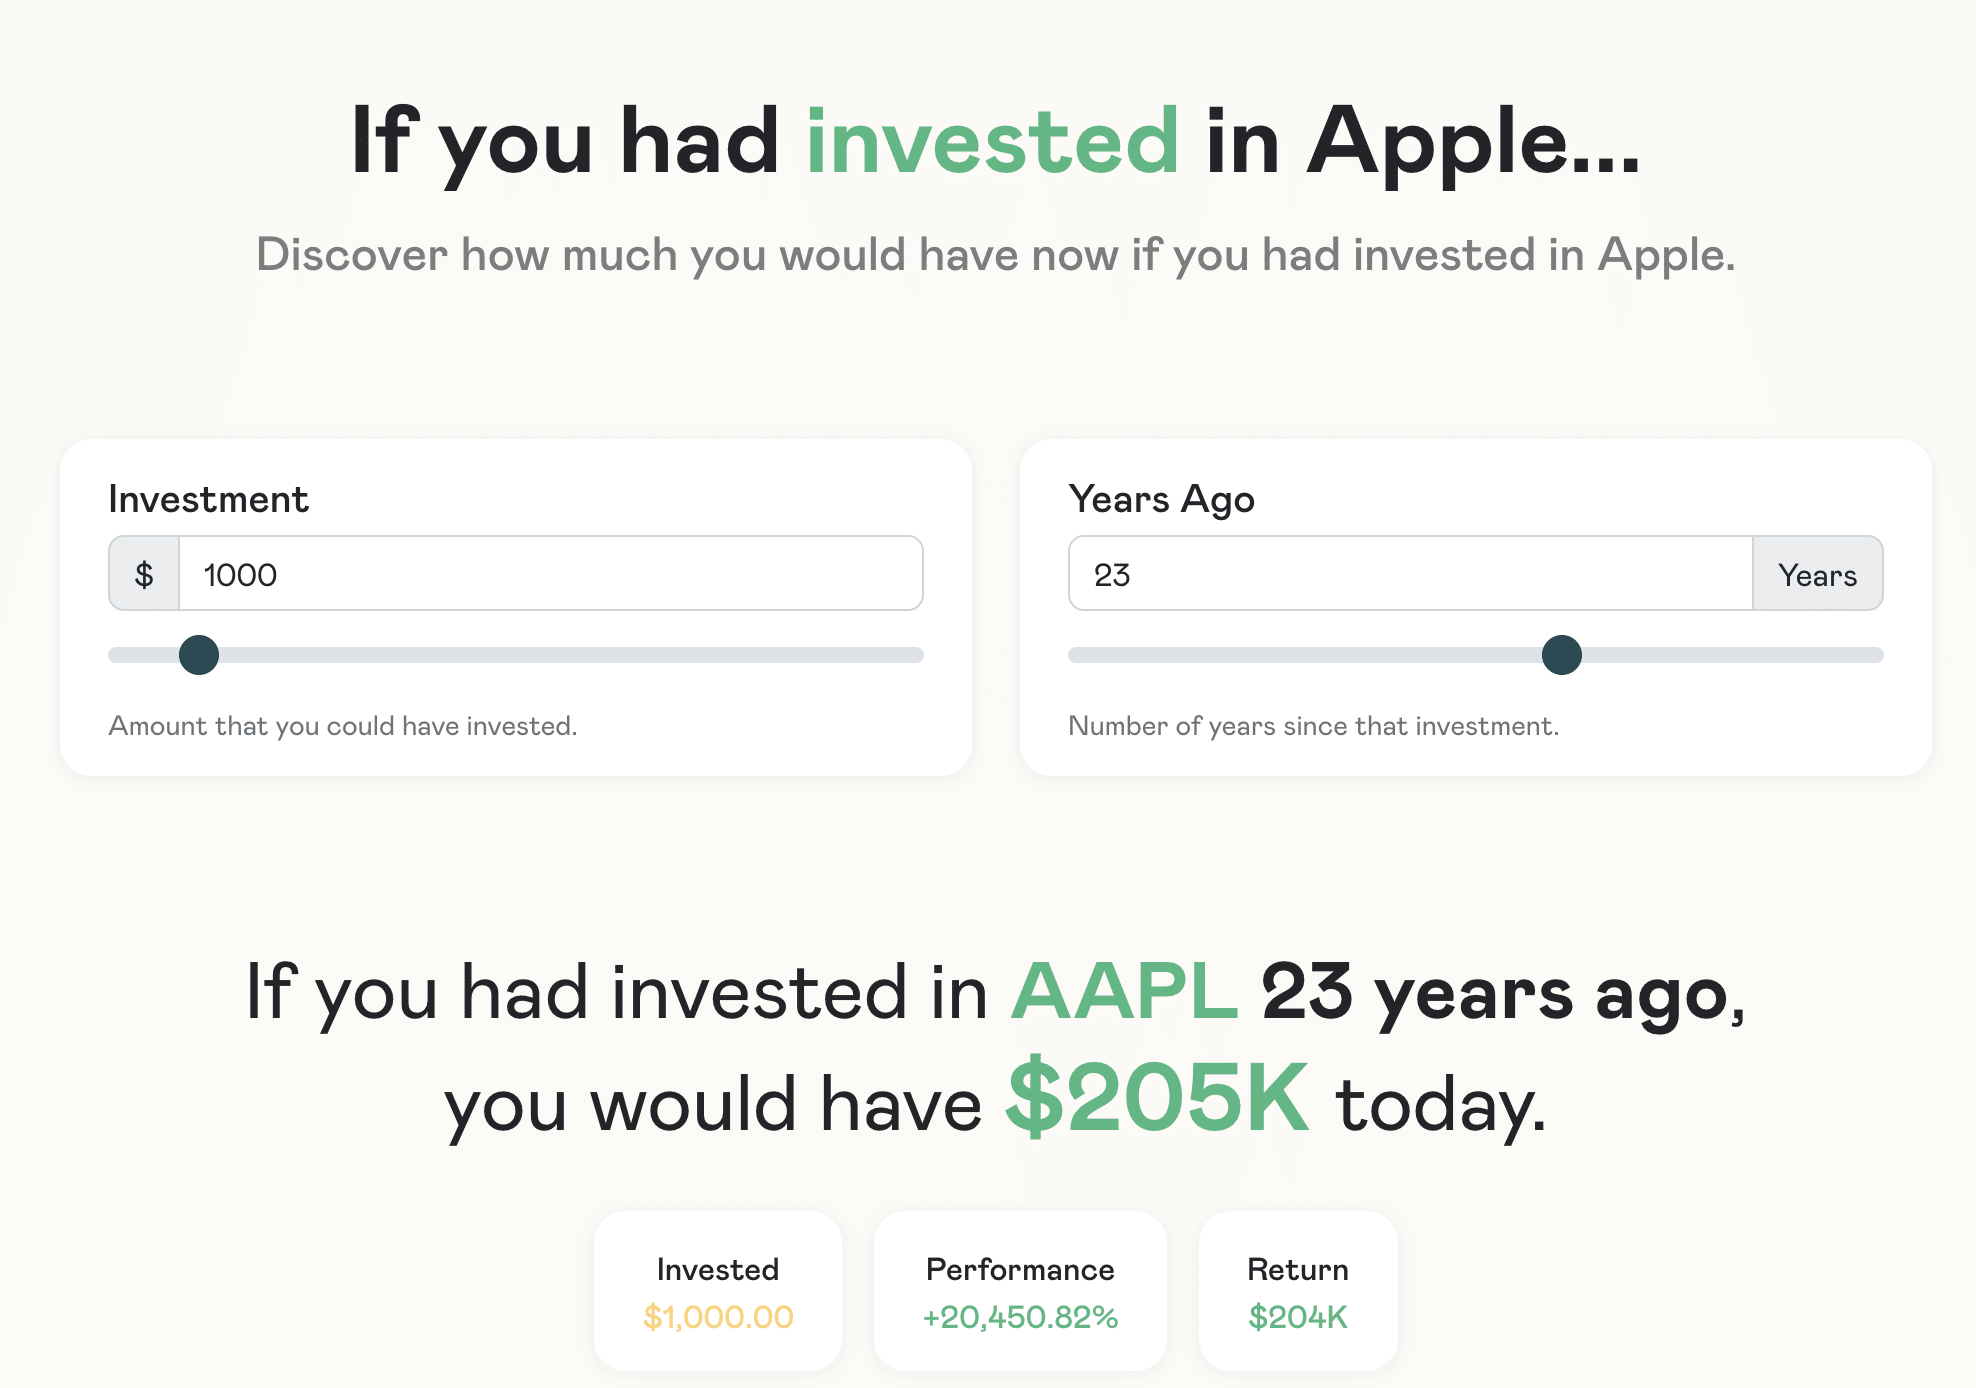 Investing in Apple since 2000